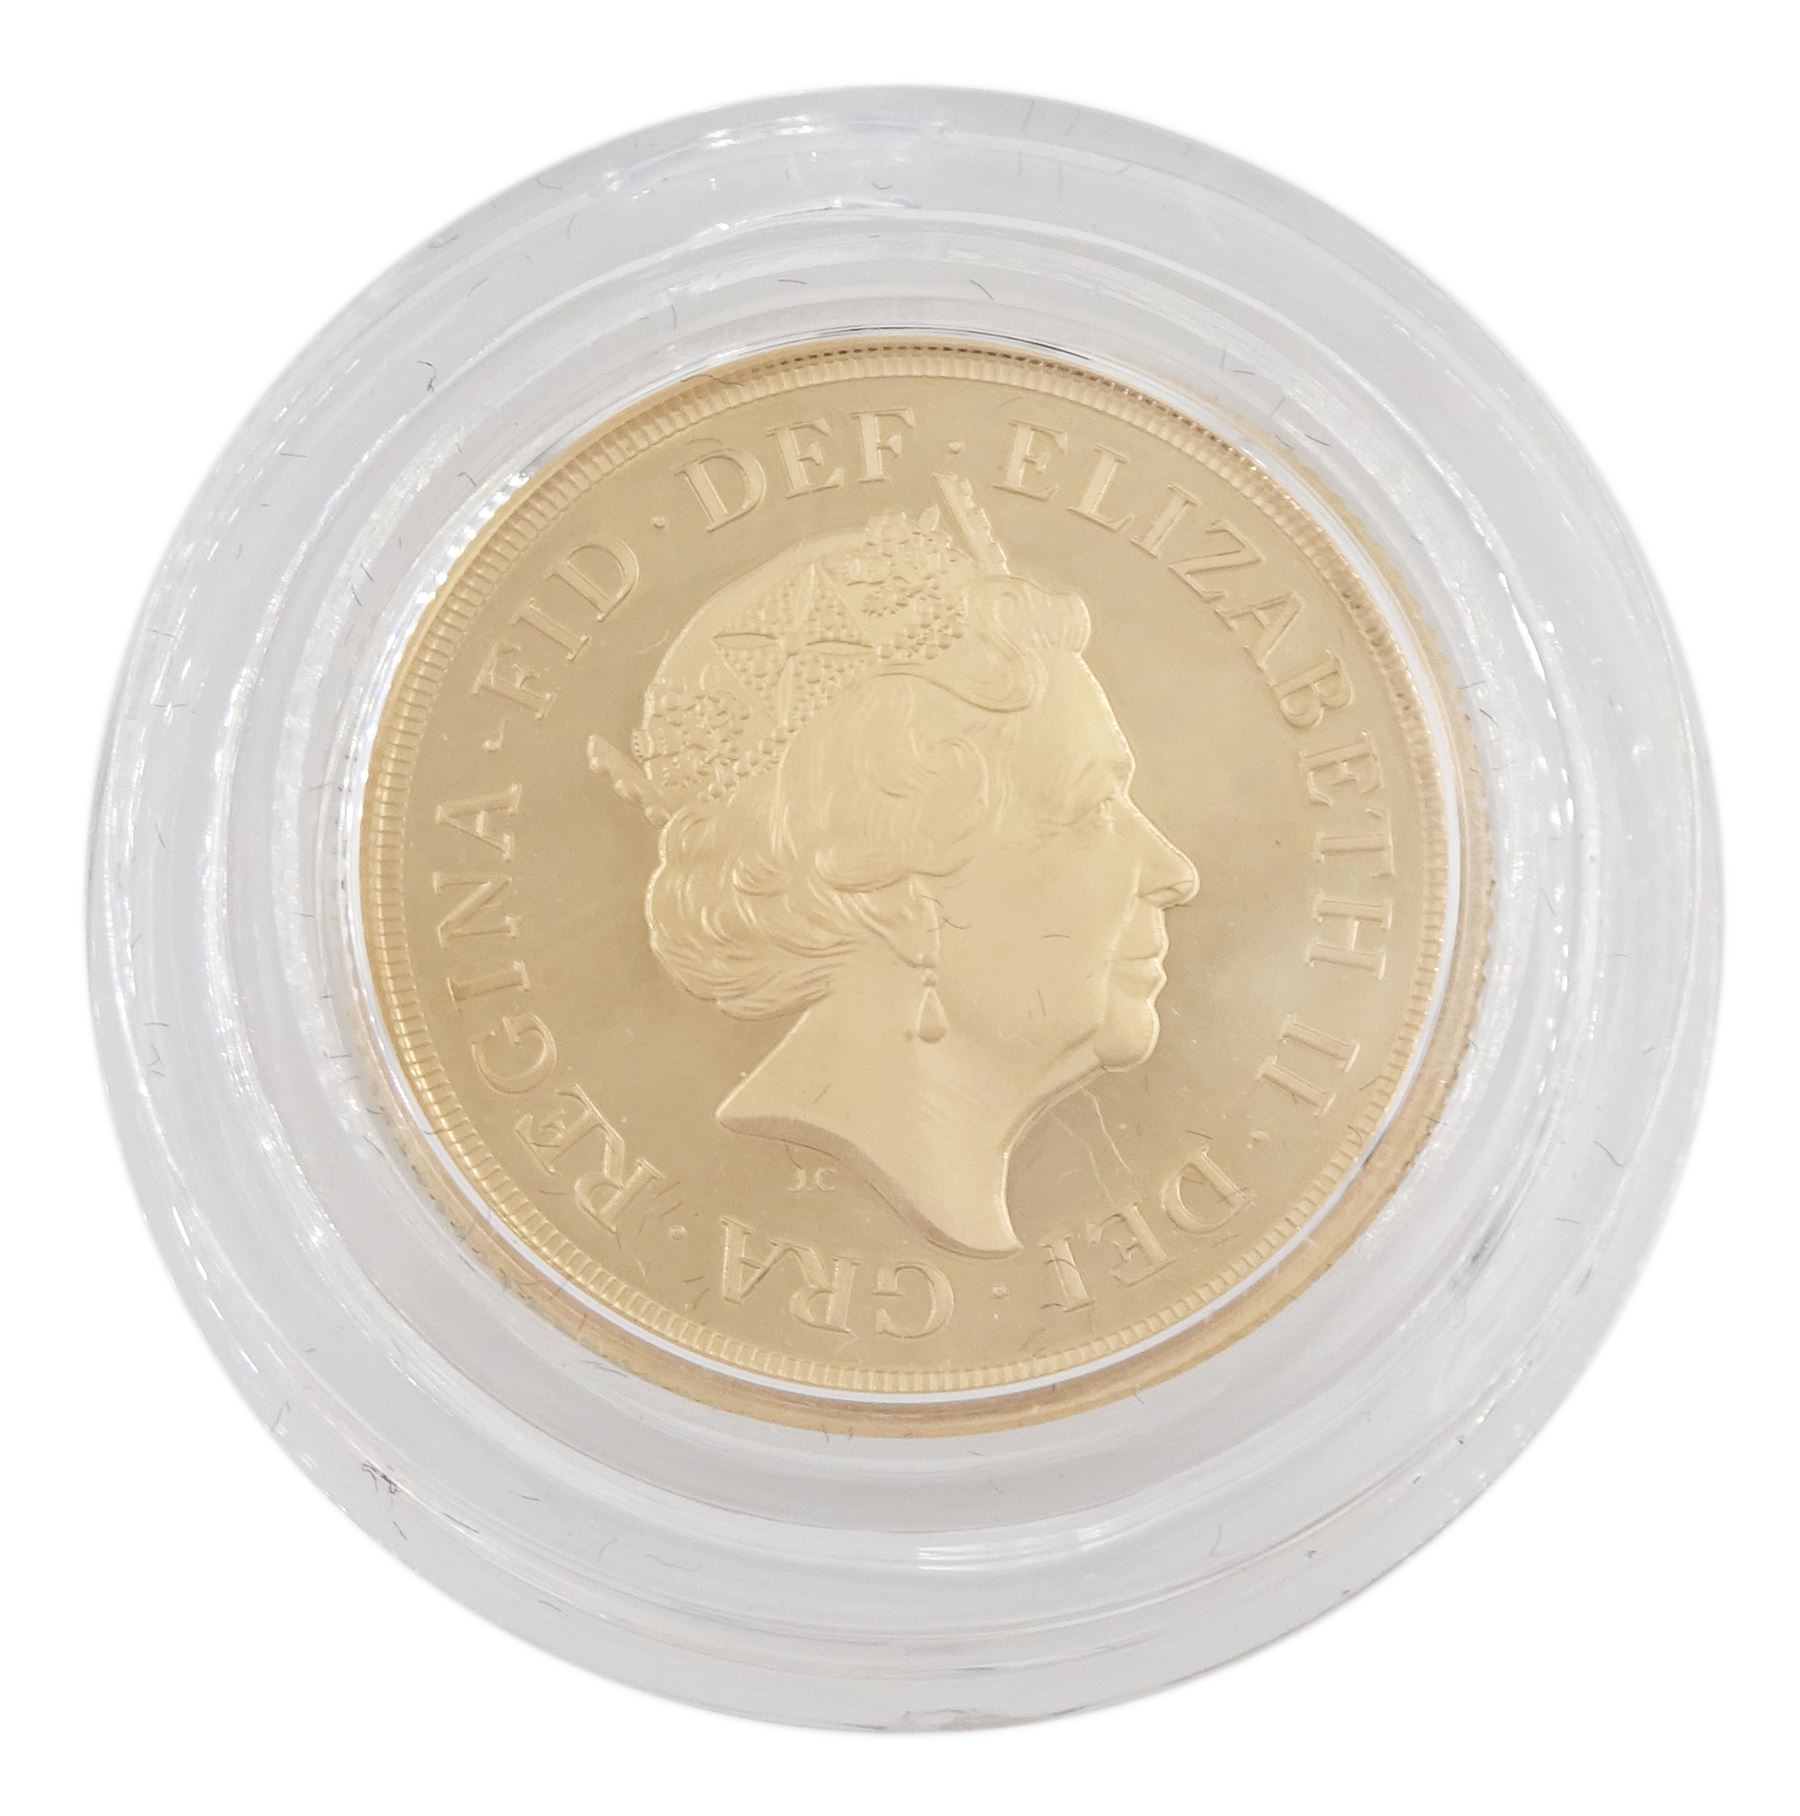 Queen Elizabeth II 2020 gold proof full sovereign coin - Image 5 of 5